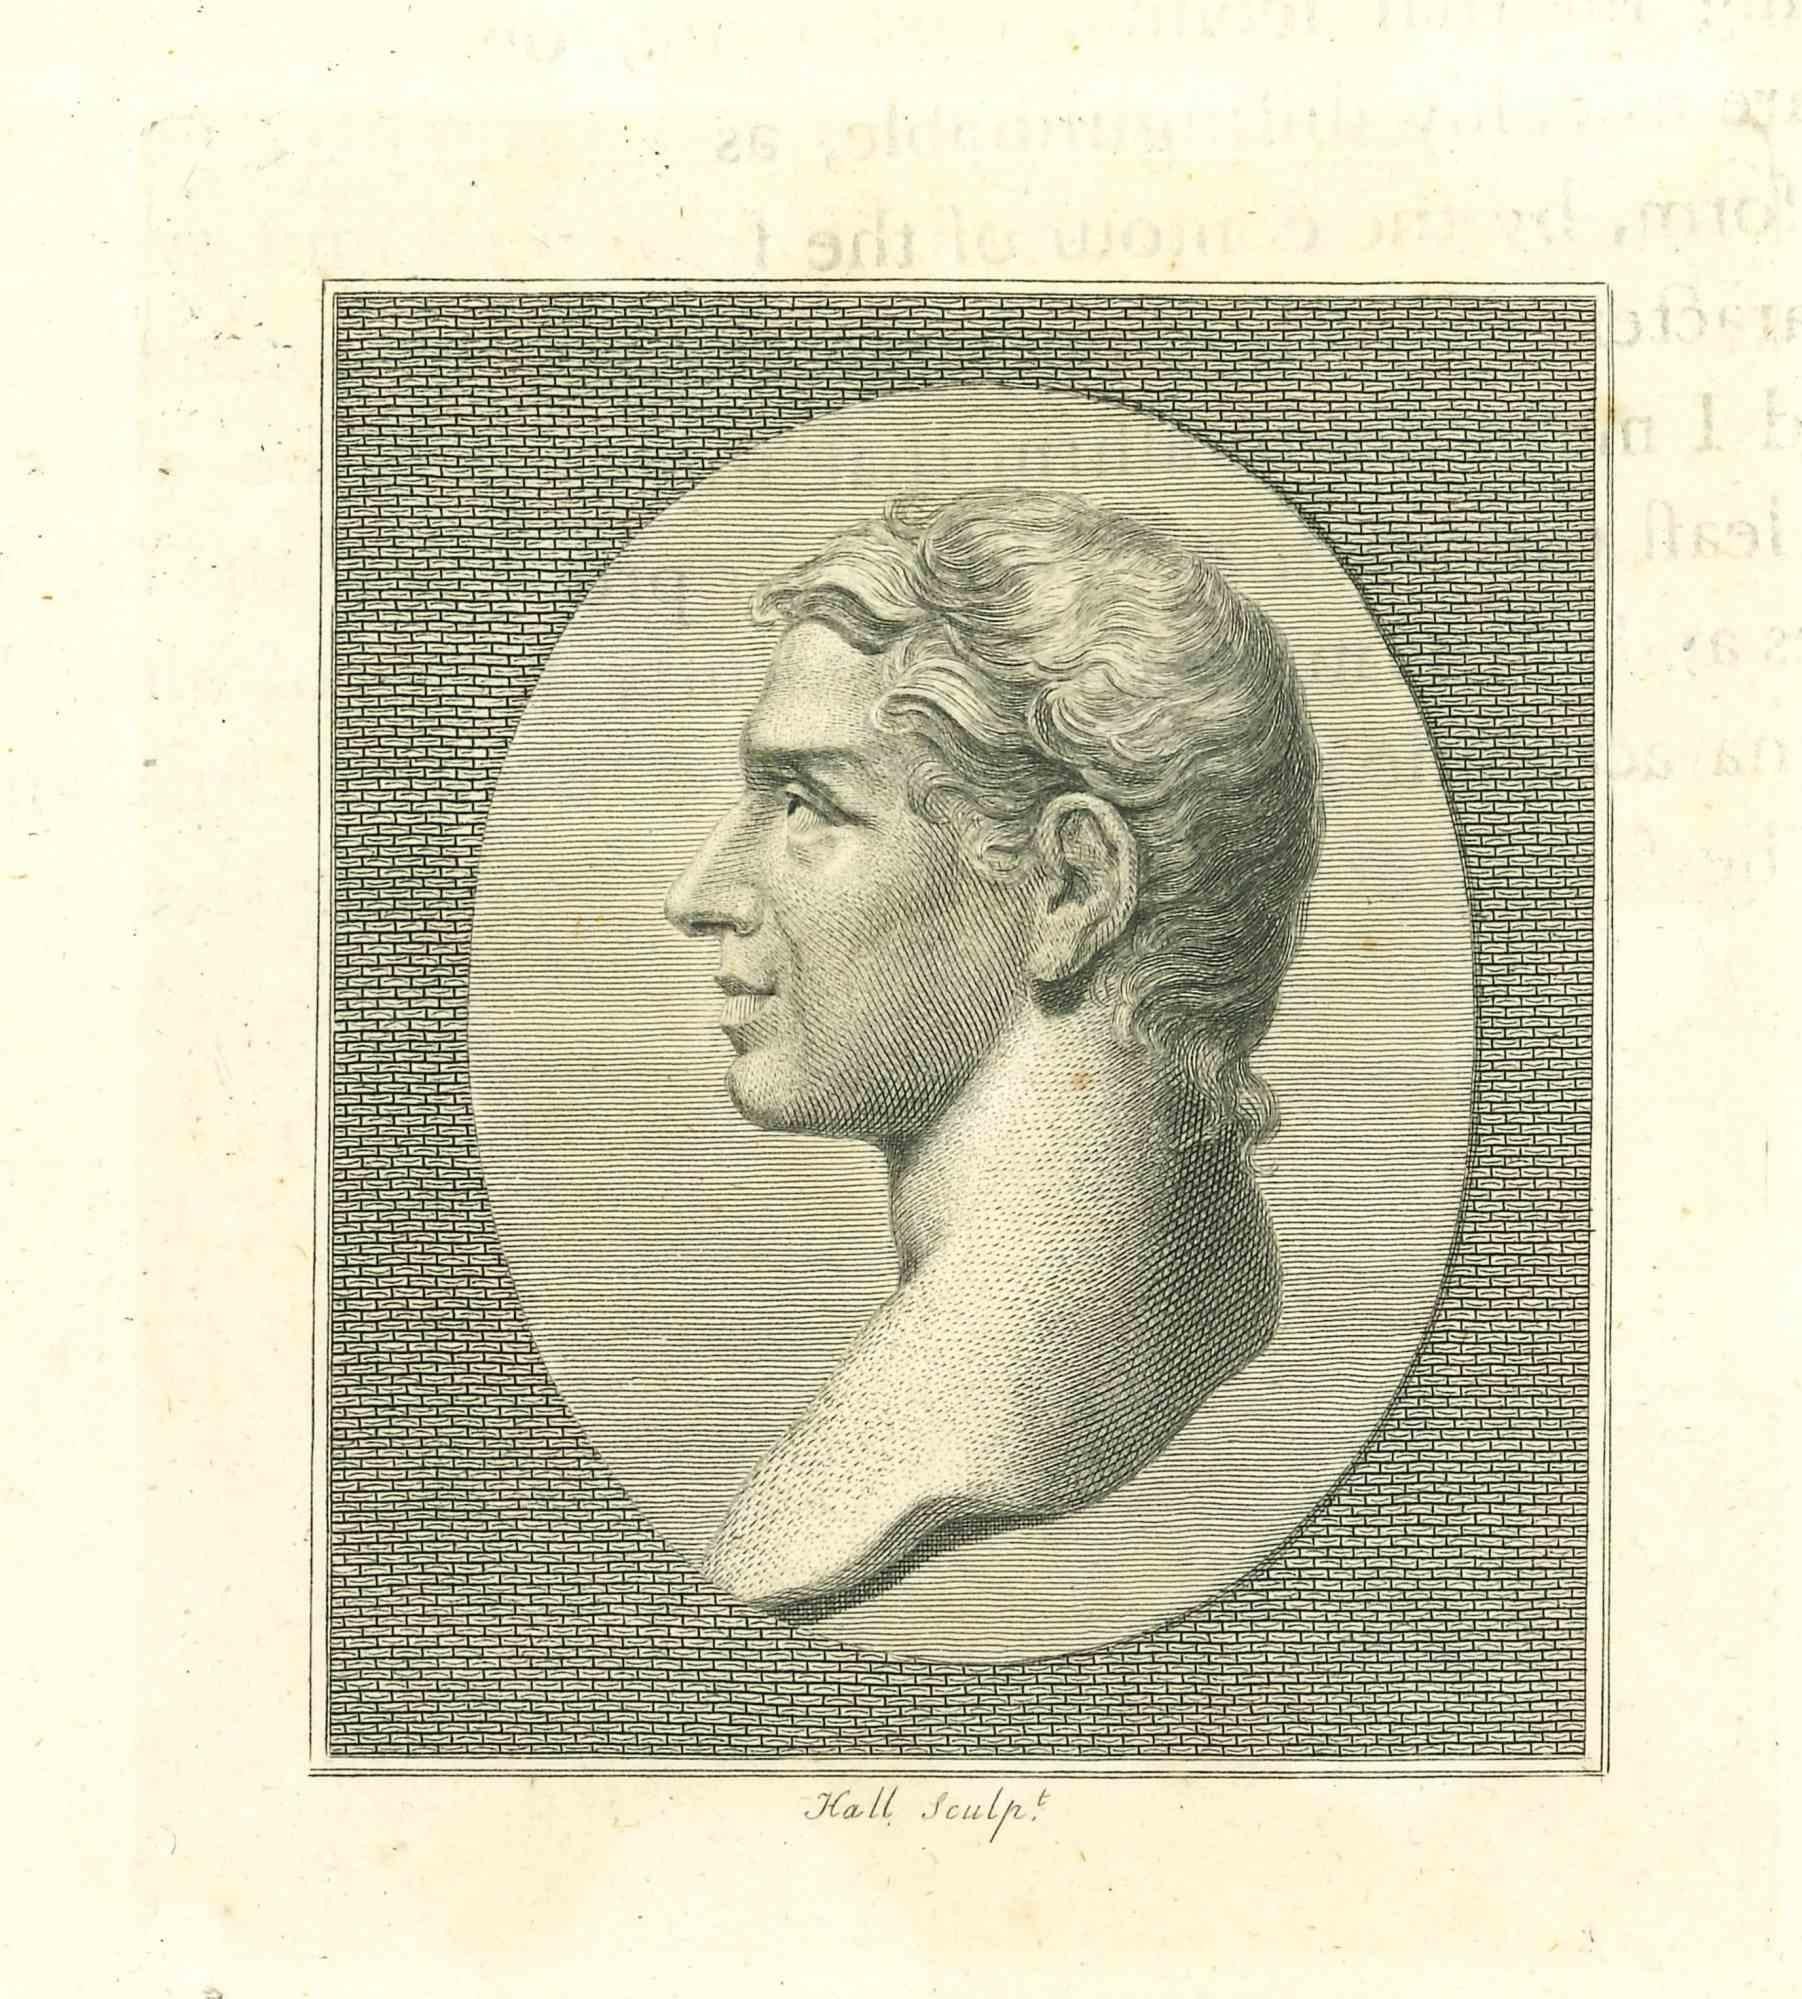 Portrait of a man is an original artwork realized by John Hall for Johann Caspar Lavater's "Essays on Physiognomy, Designed to promote the Knowledge and the Love of Mankind", London, Bensley, 1810. 

This artwork portrays a man. On the back of this